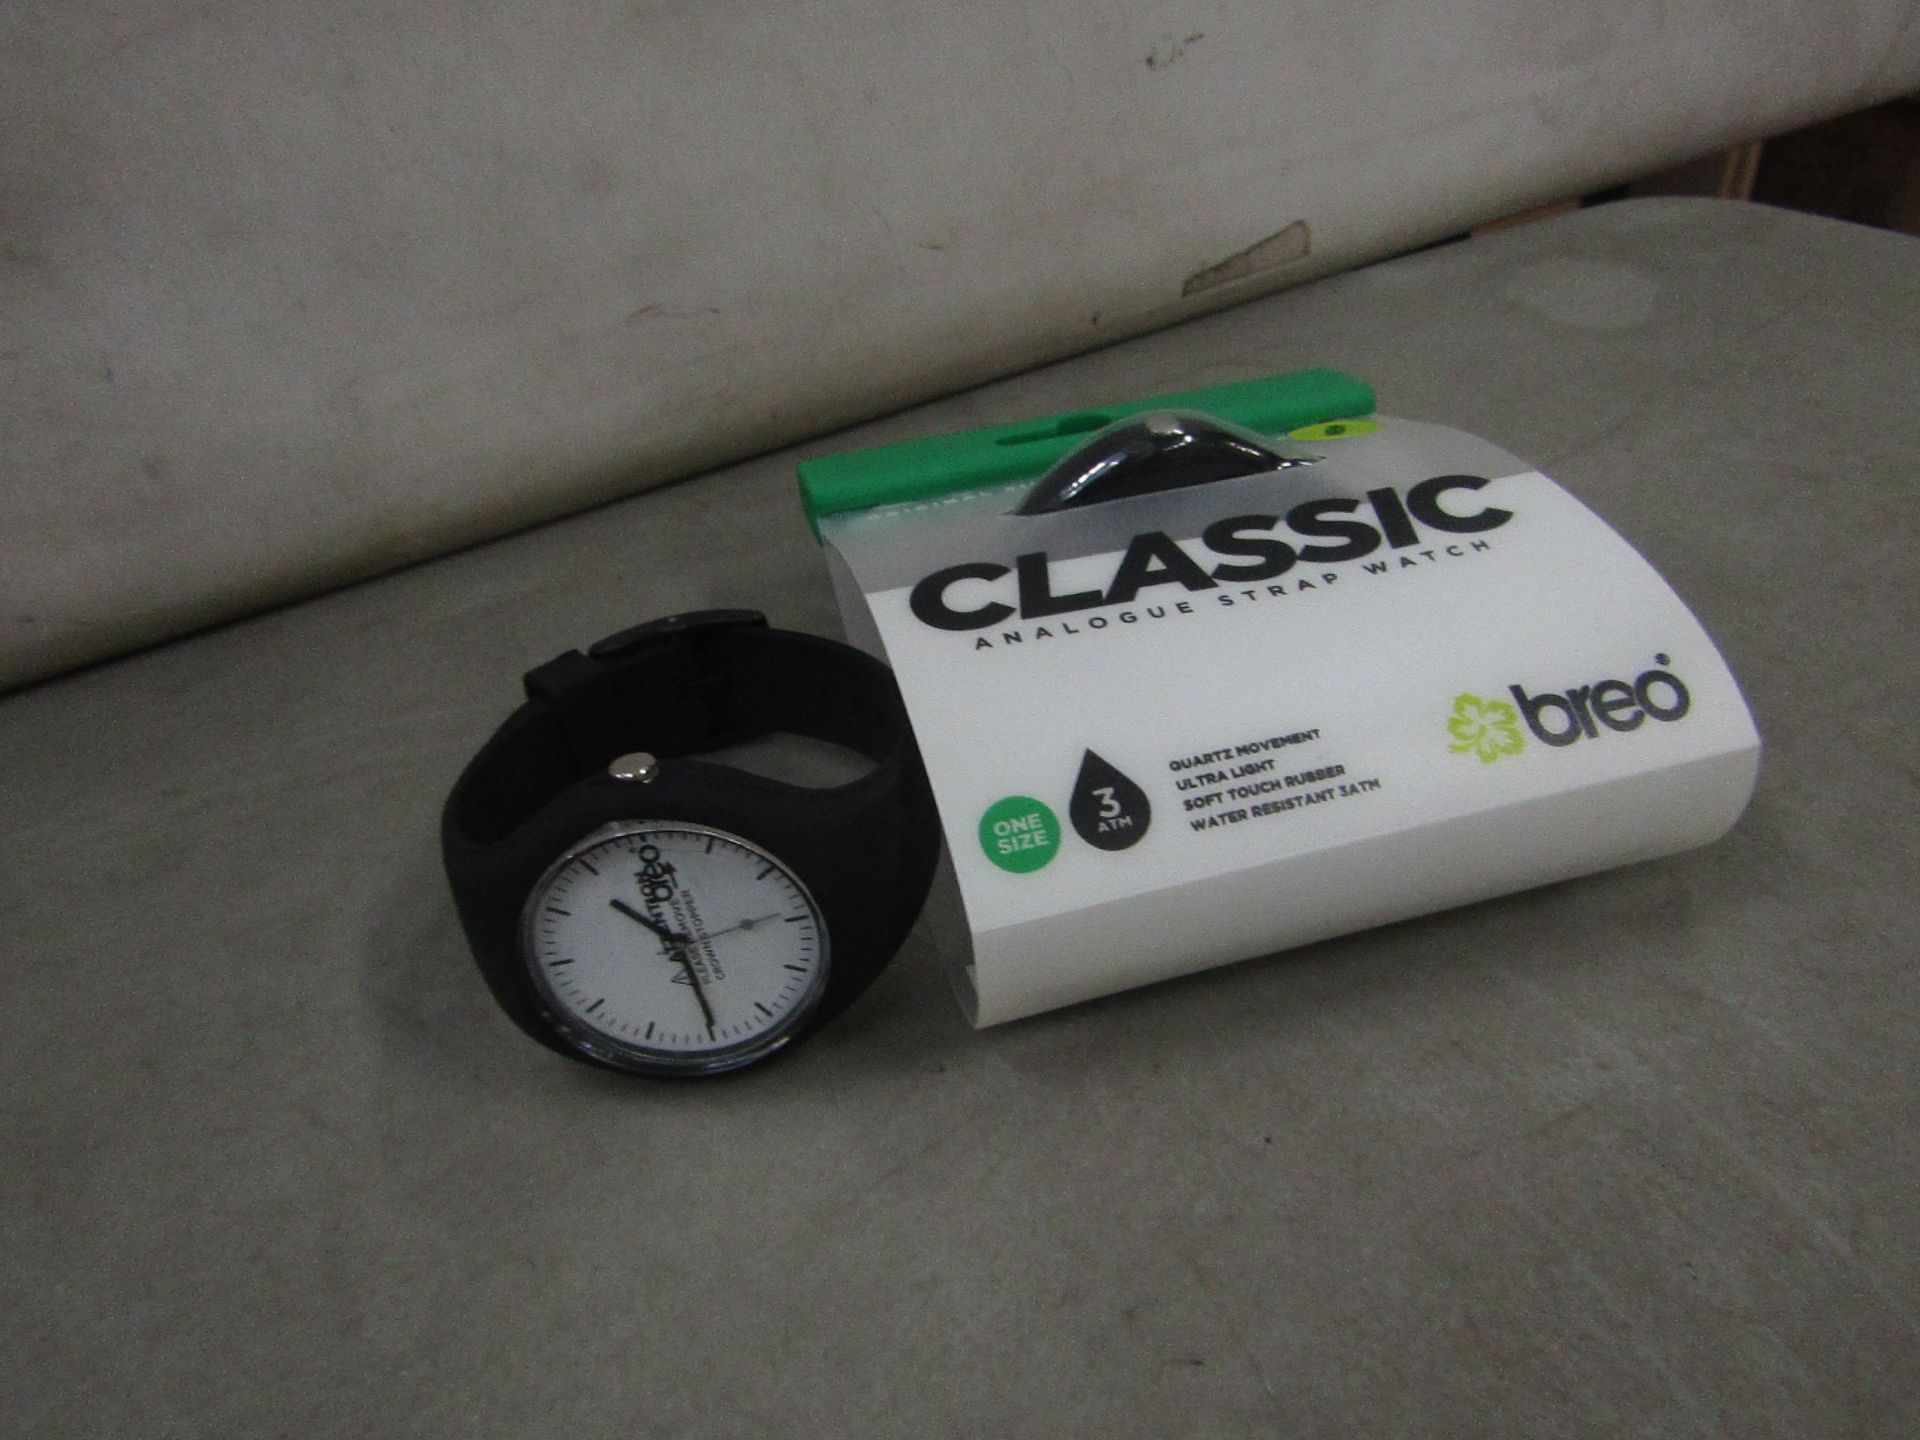 6 x Breo Classic Analogue Watches. Unused